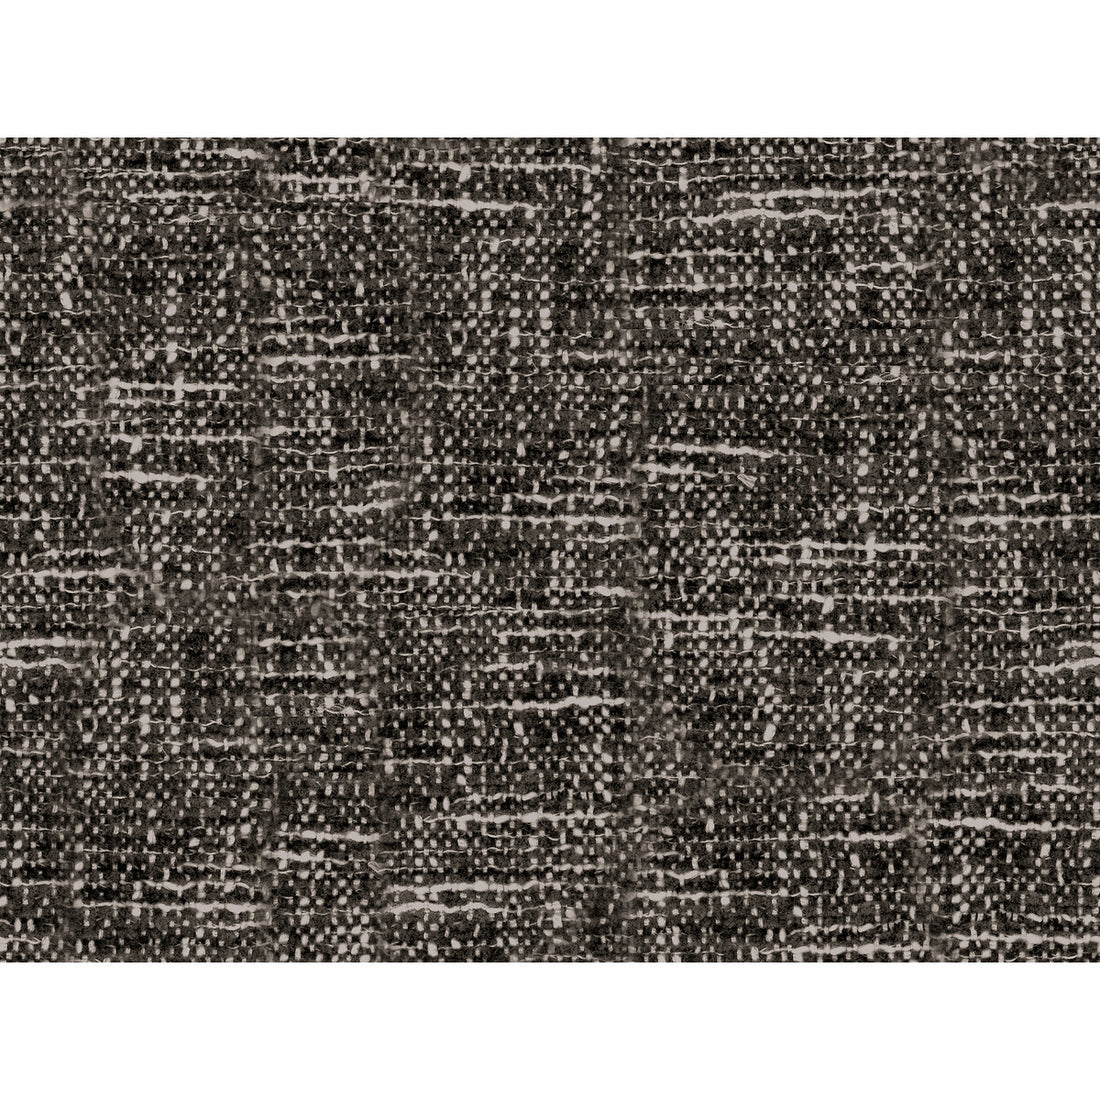 Tinge fabric in coal color - pattern GWF-3720.18.0 - by Lee Jofa Modern in the Kelly Wearstler Textures collection